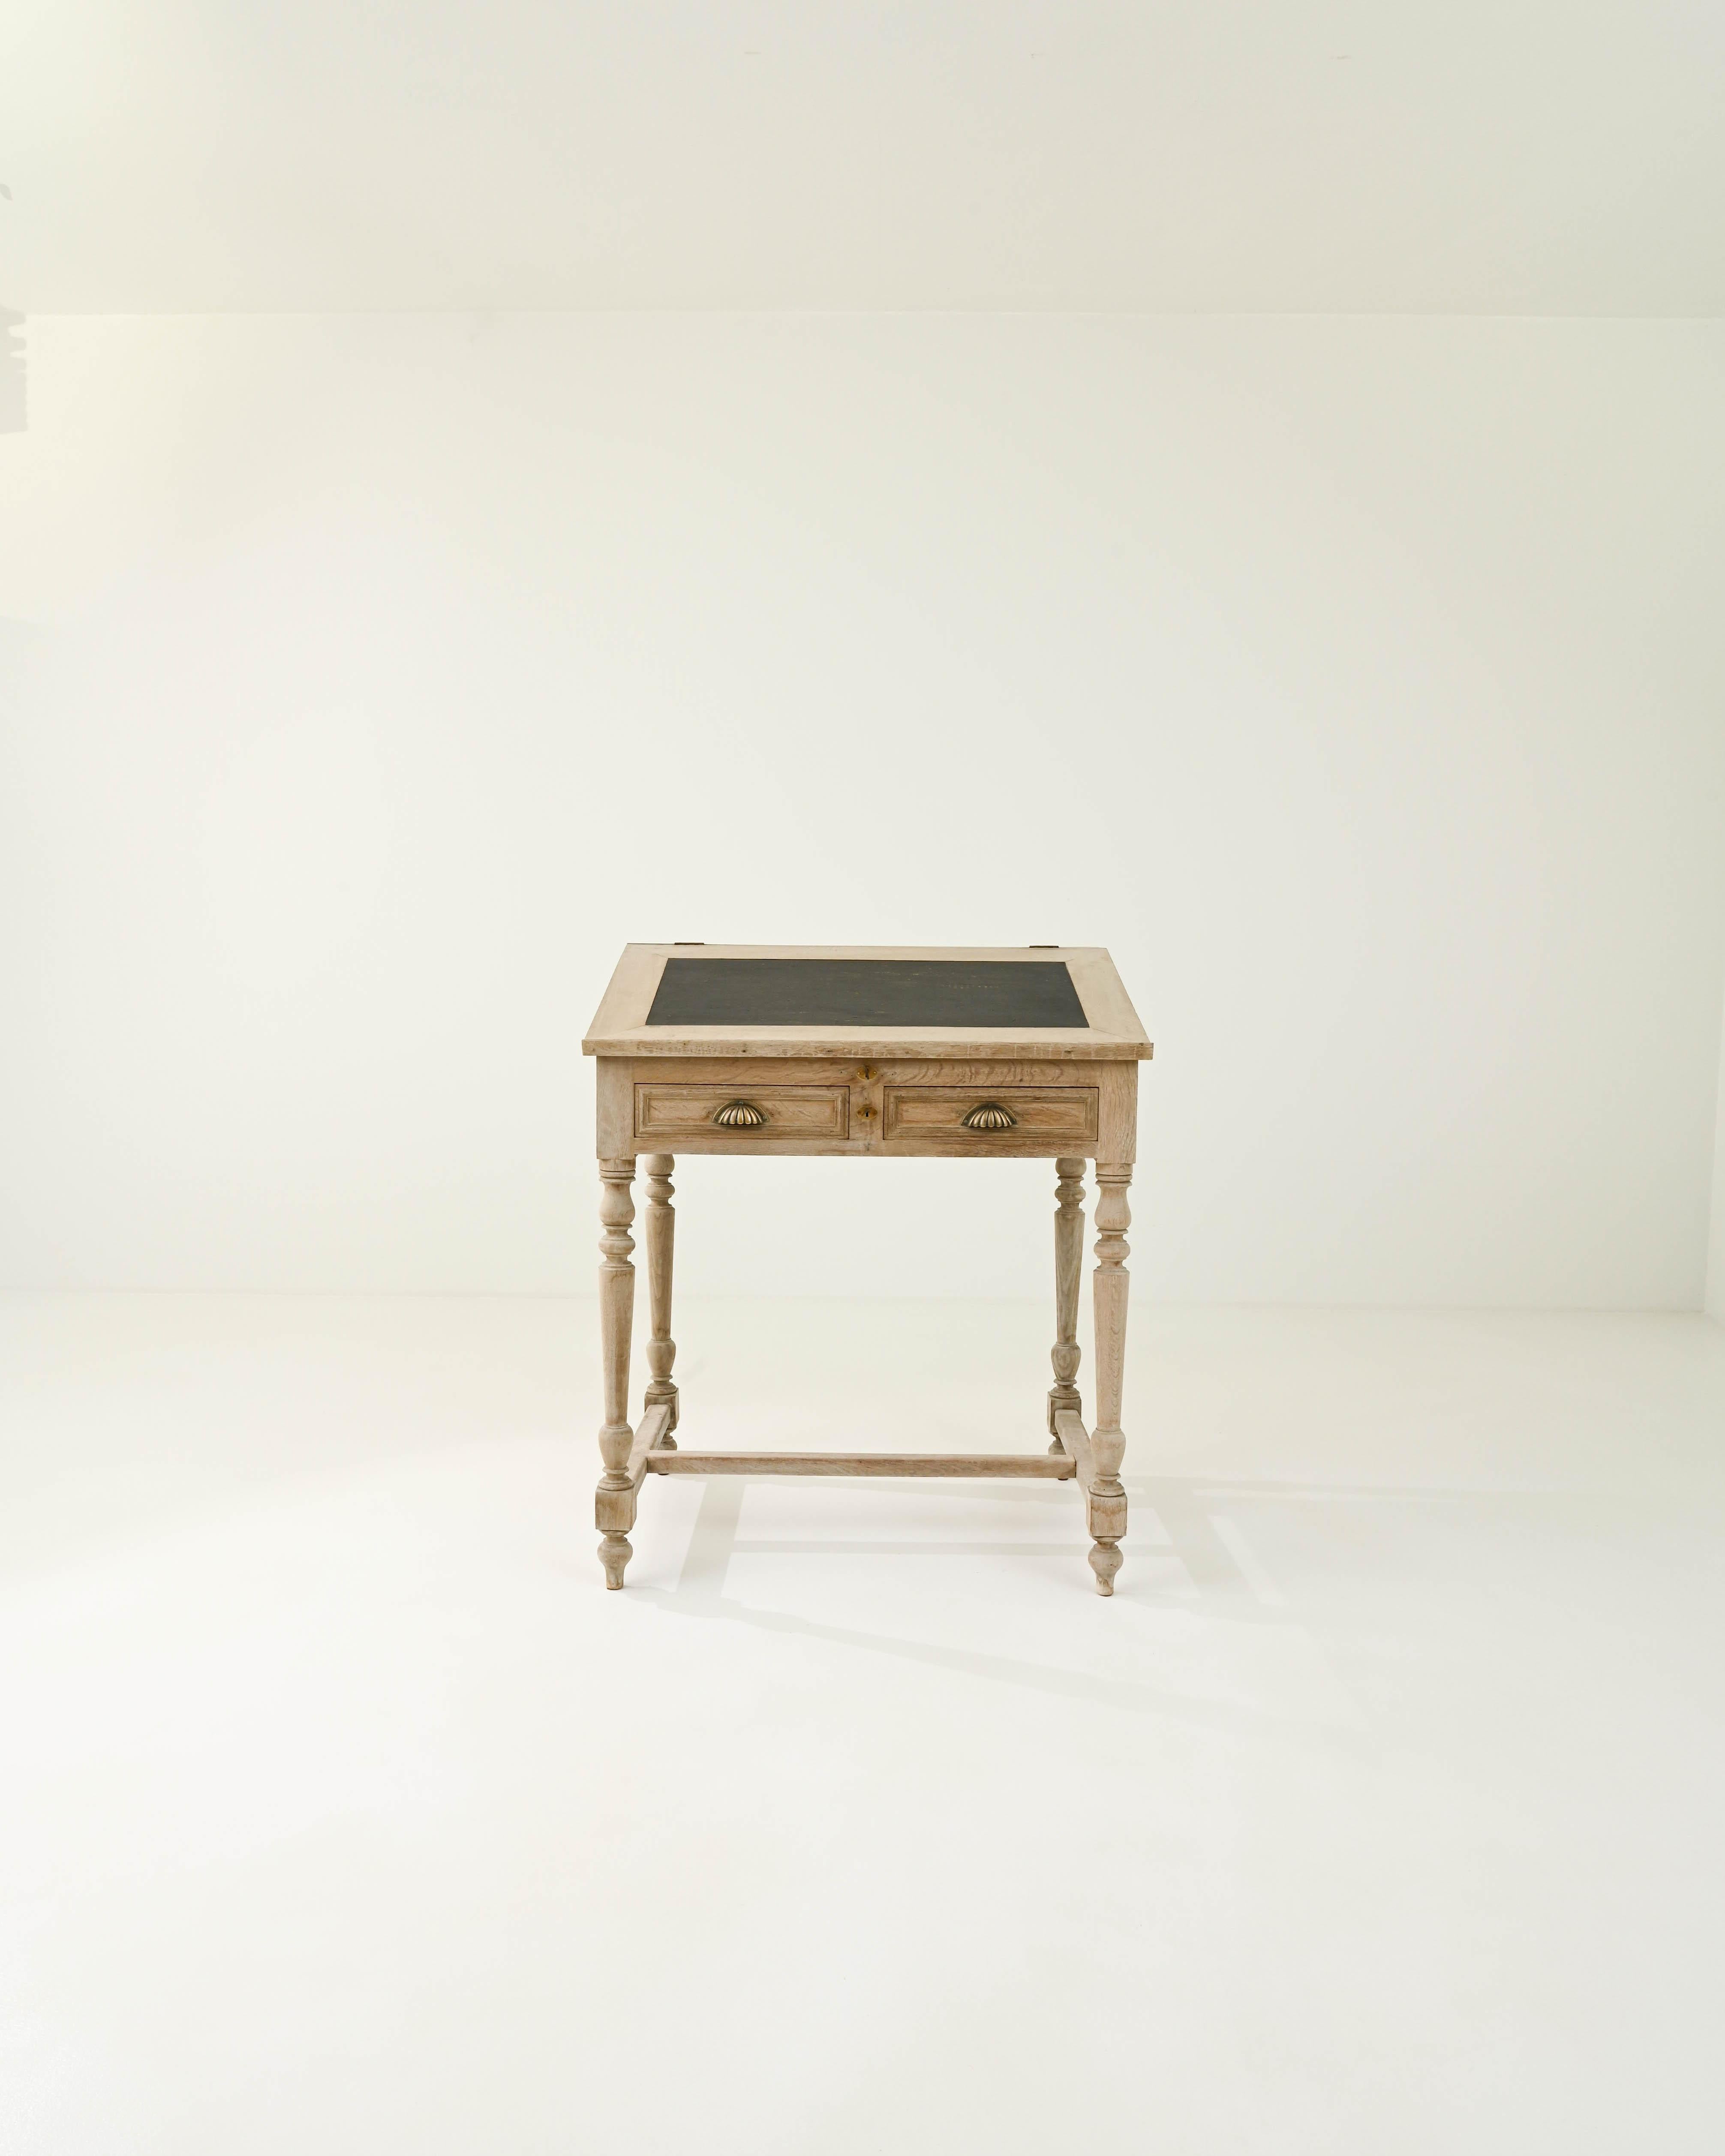 This oak desk was made in France in the 19th Century. An original concept for a standing height desk, this practical piece is designed in the elegant style of the 1800s. Lathed legs and scalloped brass drawer pulls give a formal feel, while the